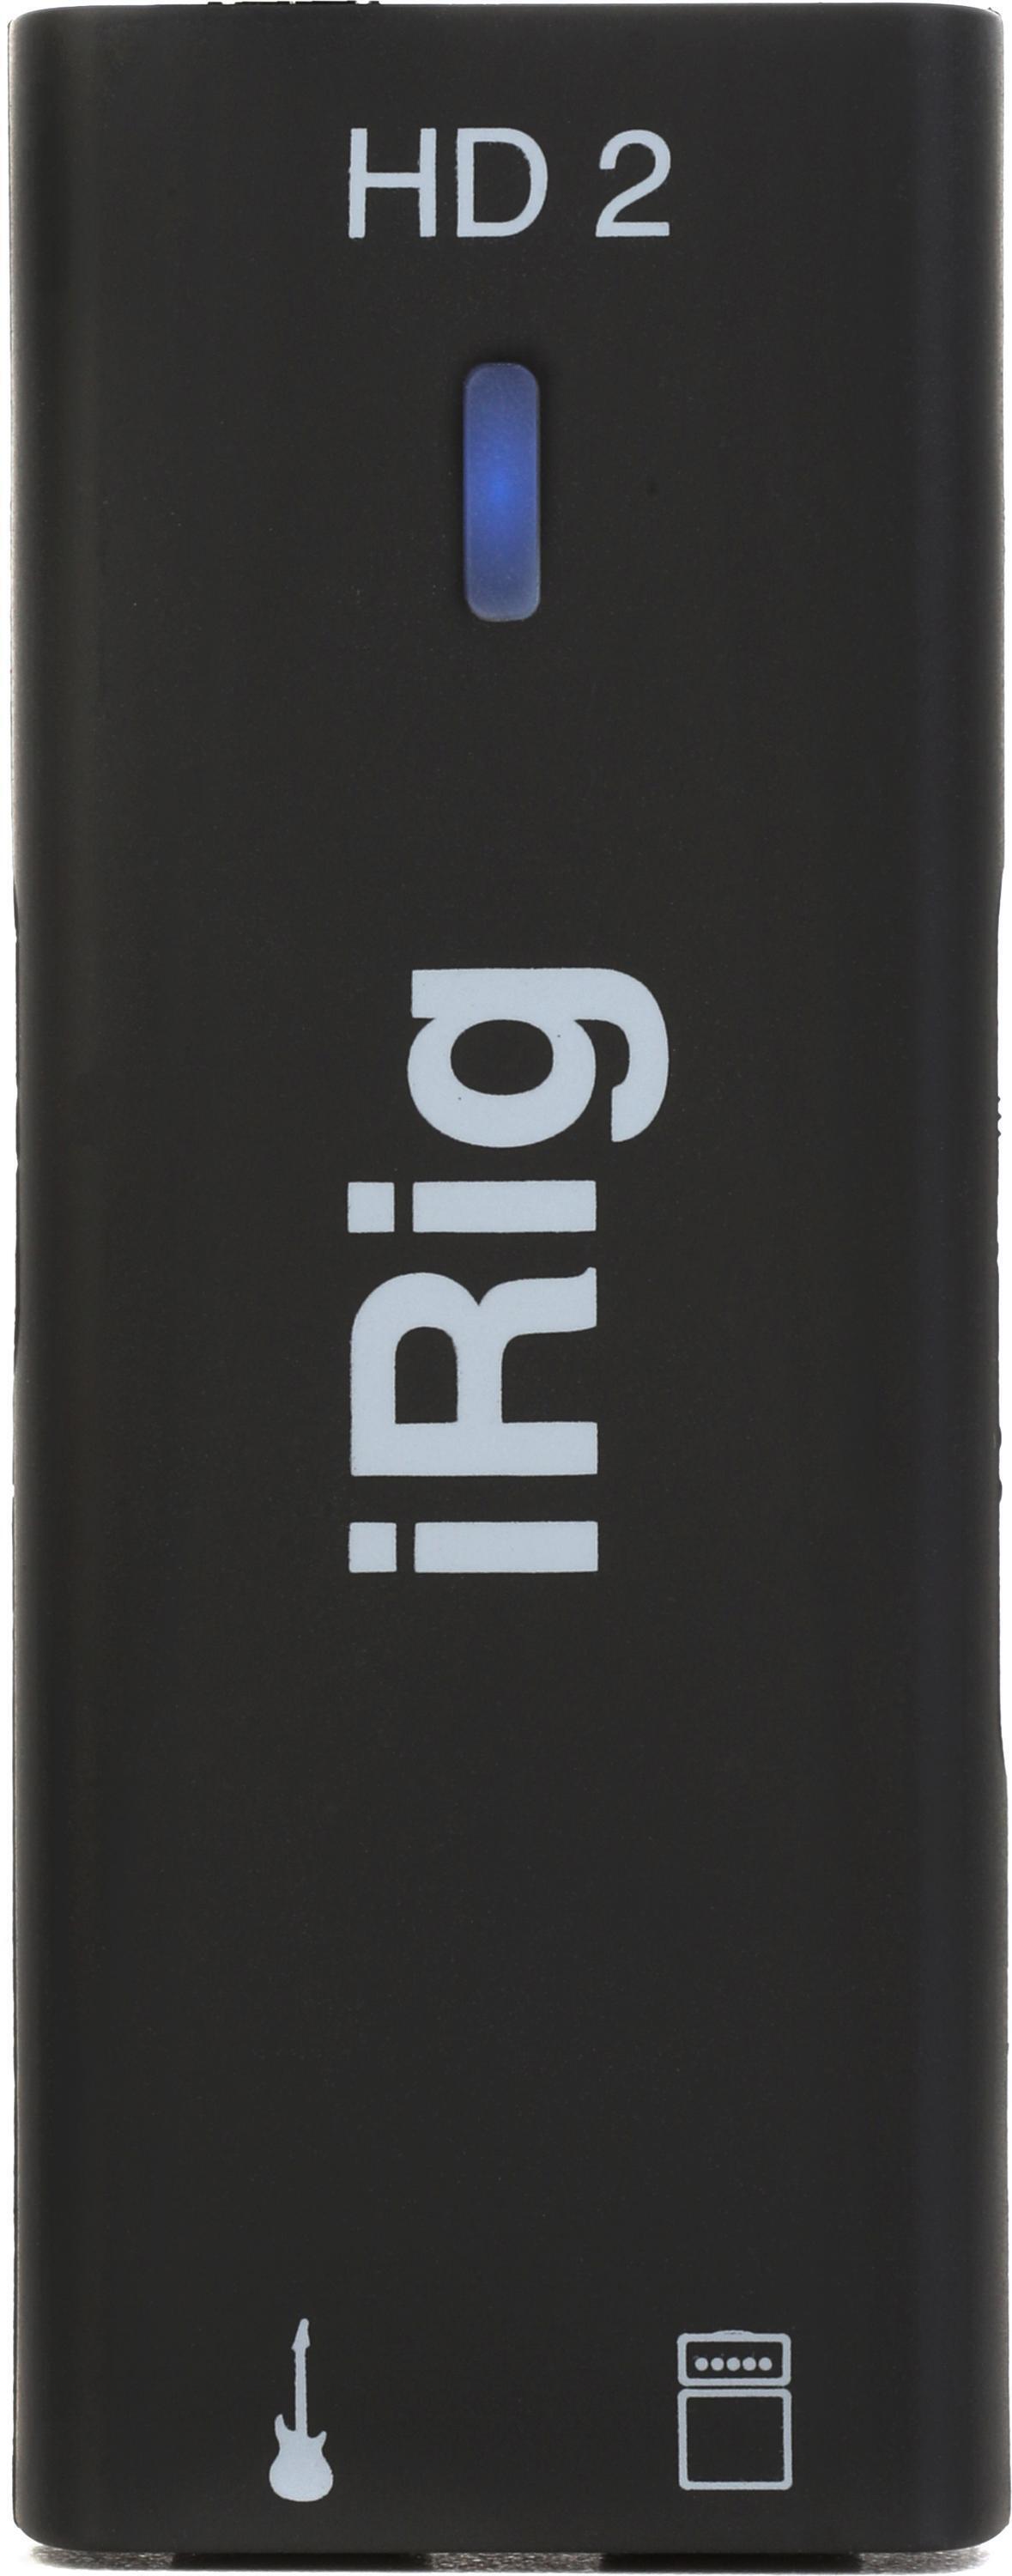 NEW ARRIVALS: IK Multimedia iRig 2 Guitar Interface for iOS Devices –  Living Music